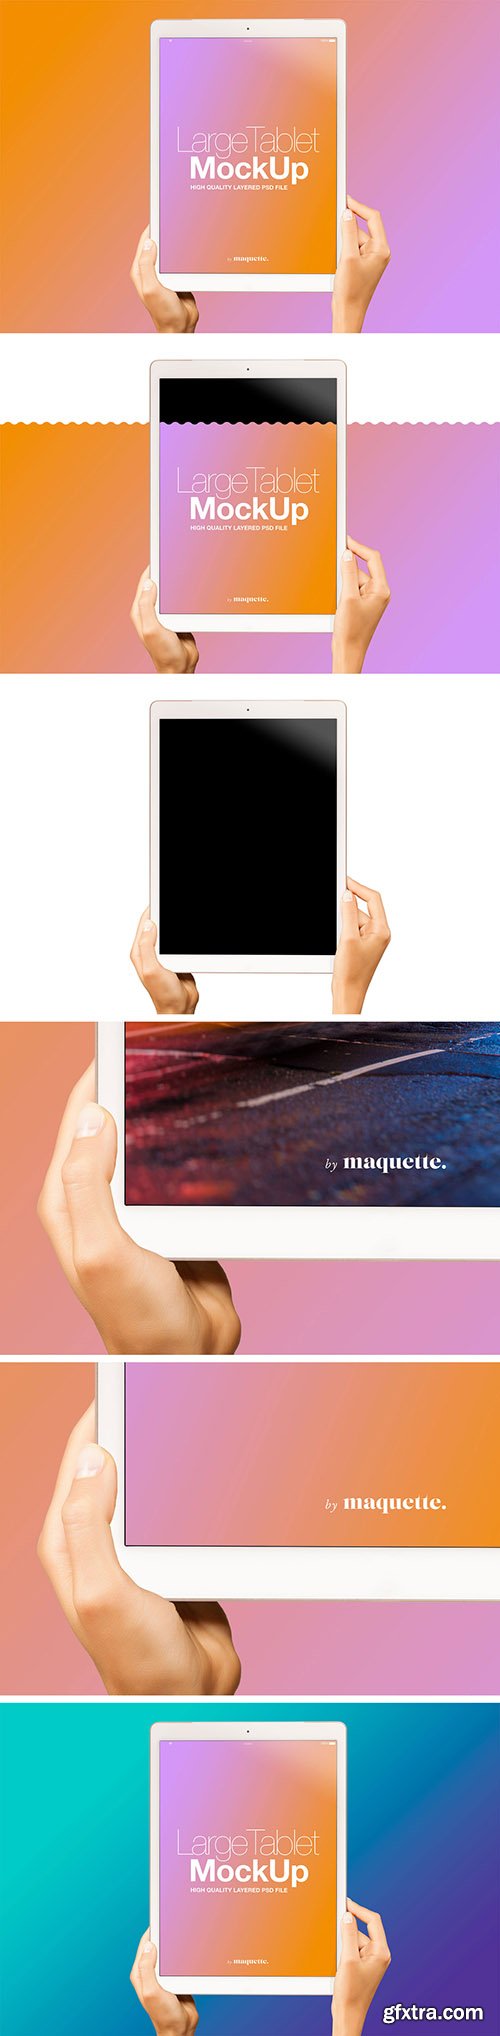 Hands with Tablet on Gradient Background Mockup 20 126680769